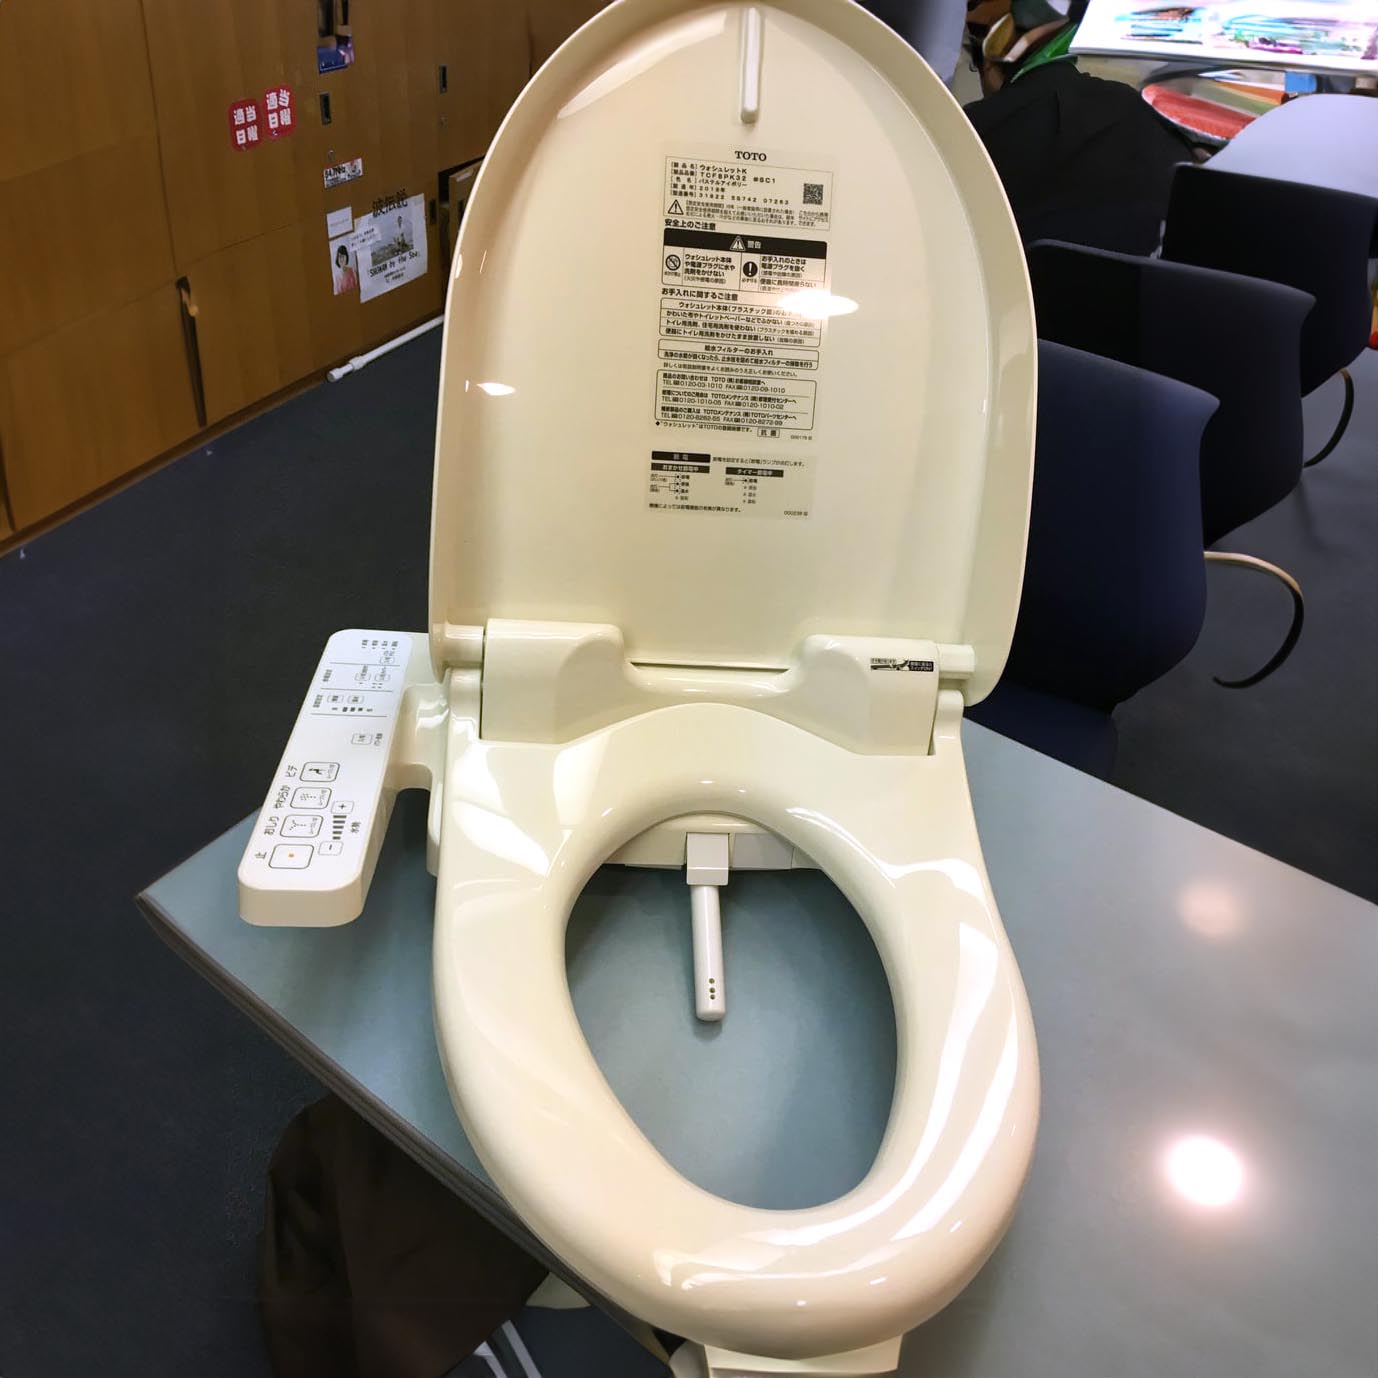 Japanese Toilets: Between Technological Innovation and Exceptional Comfort